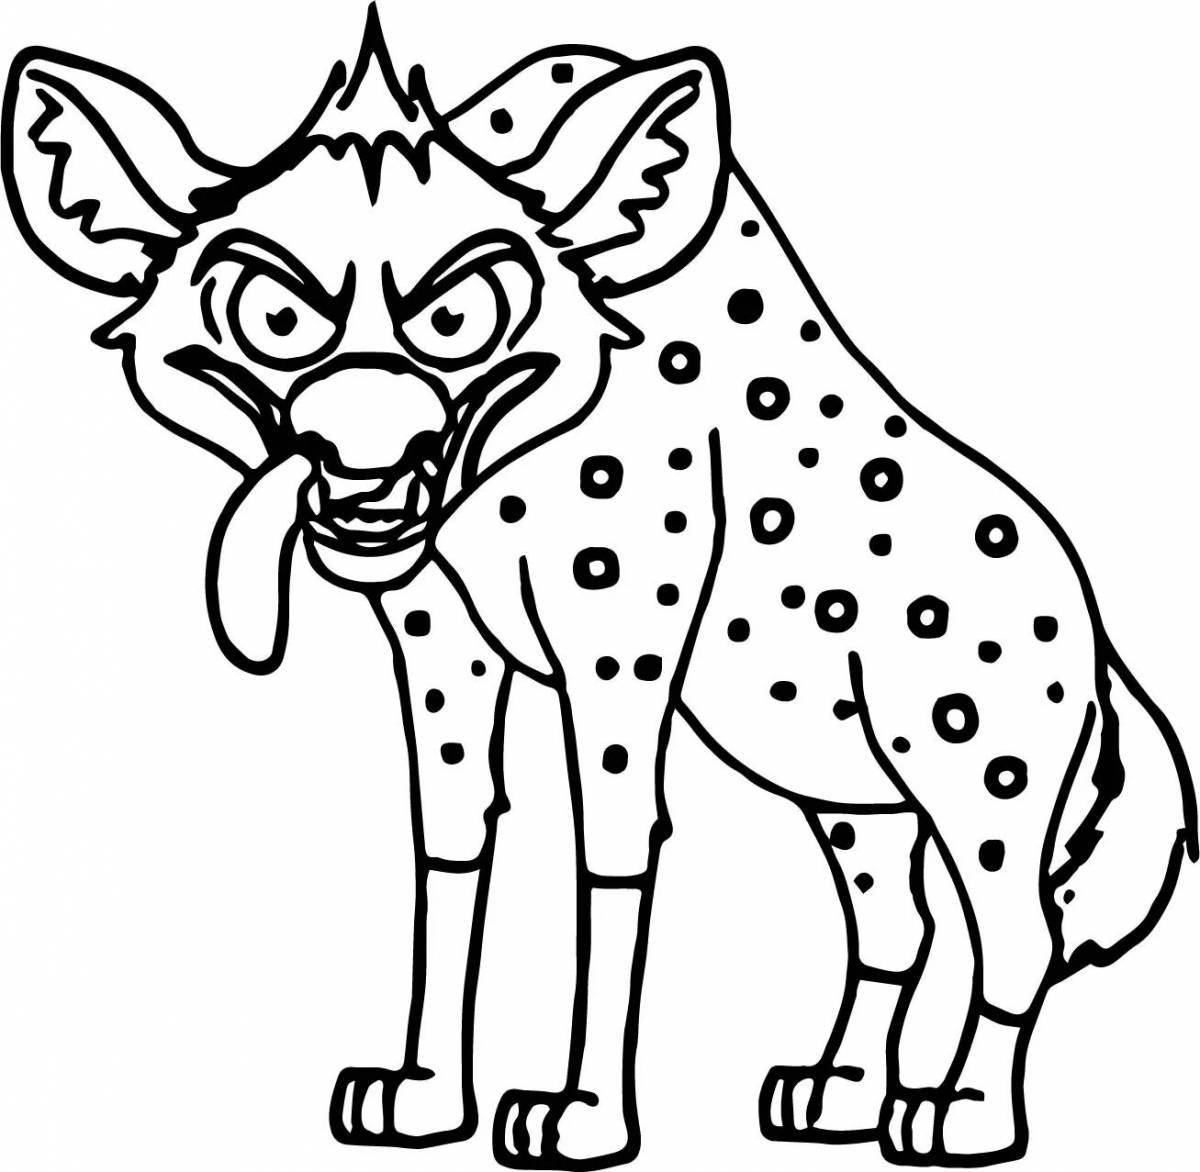 Coloring page happy striped hyena